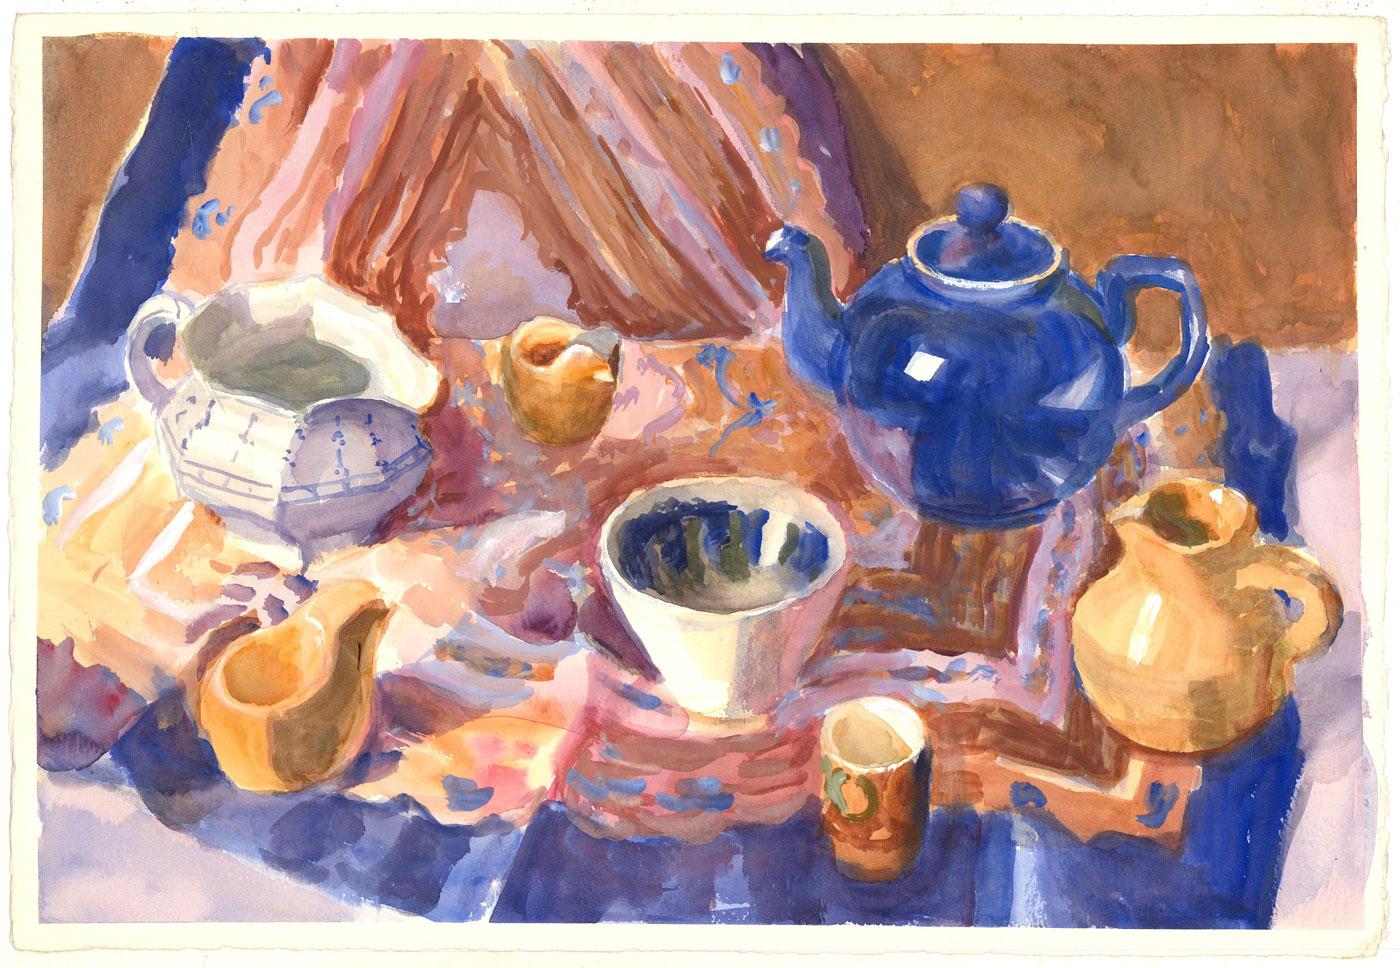 A sheet of woven boasts equally compelling watercolors on both sides. Both paintings' subjects focus on ceramic ware and are executed with beaming and vivid palettes.

Unsigned. On wove.